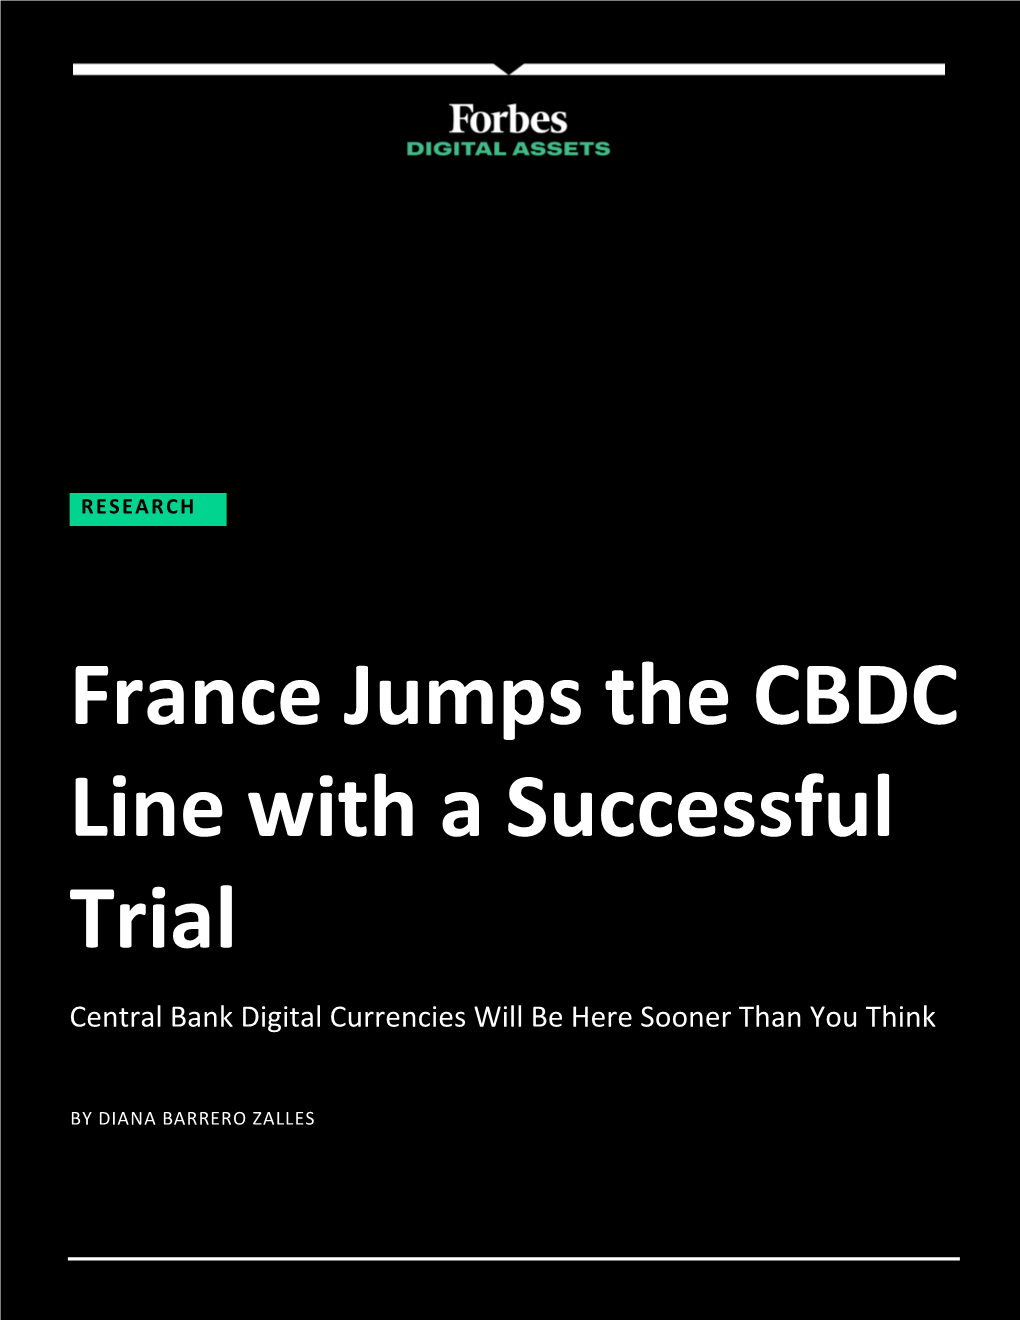 France Jumps the CBDC Line with a Successful Trial Central Bank Digital Currencies Will Be Here Sooner Than You Think by DIANA BARRERO ZALLES [DATE]